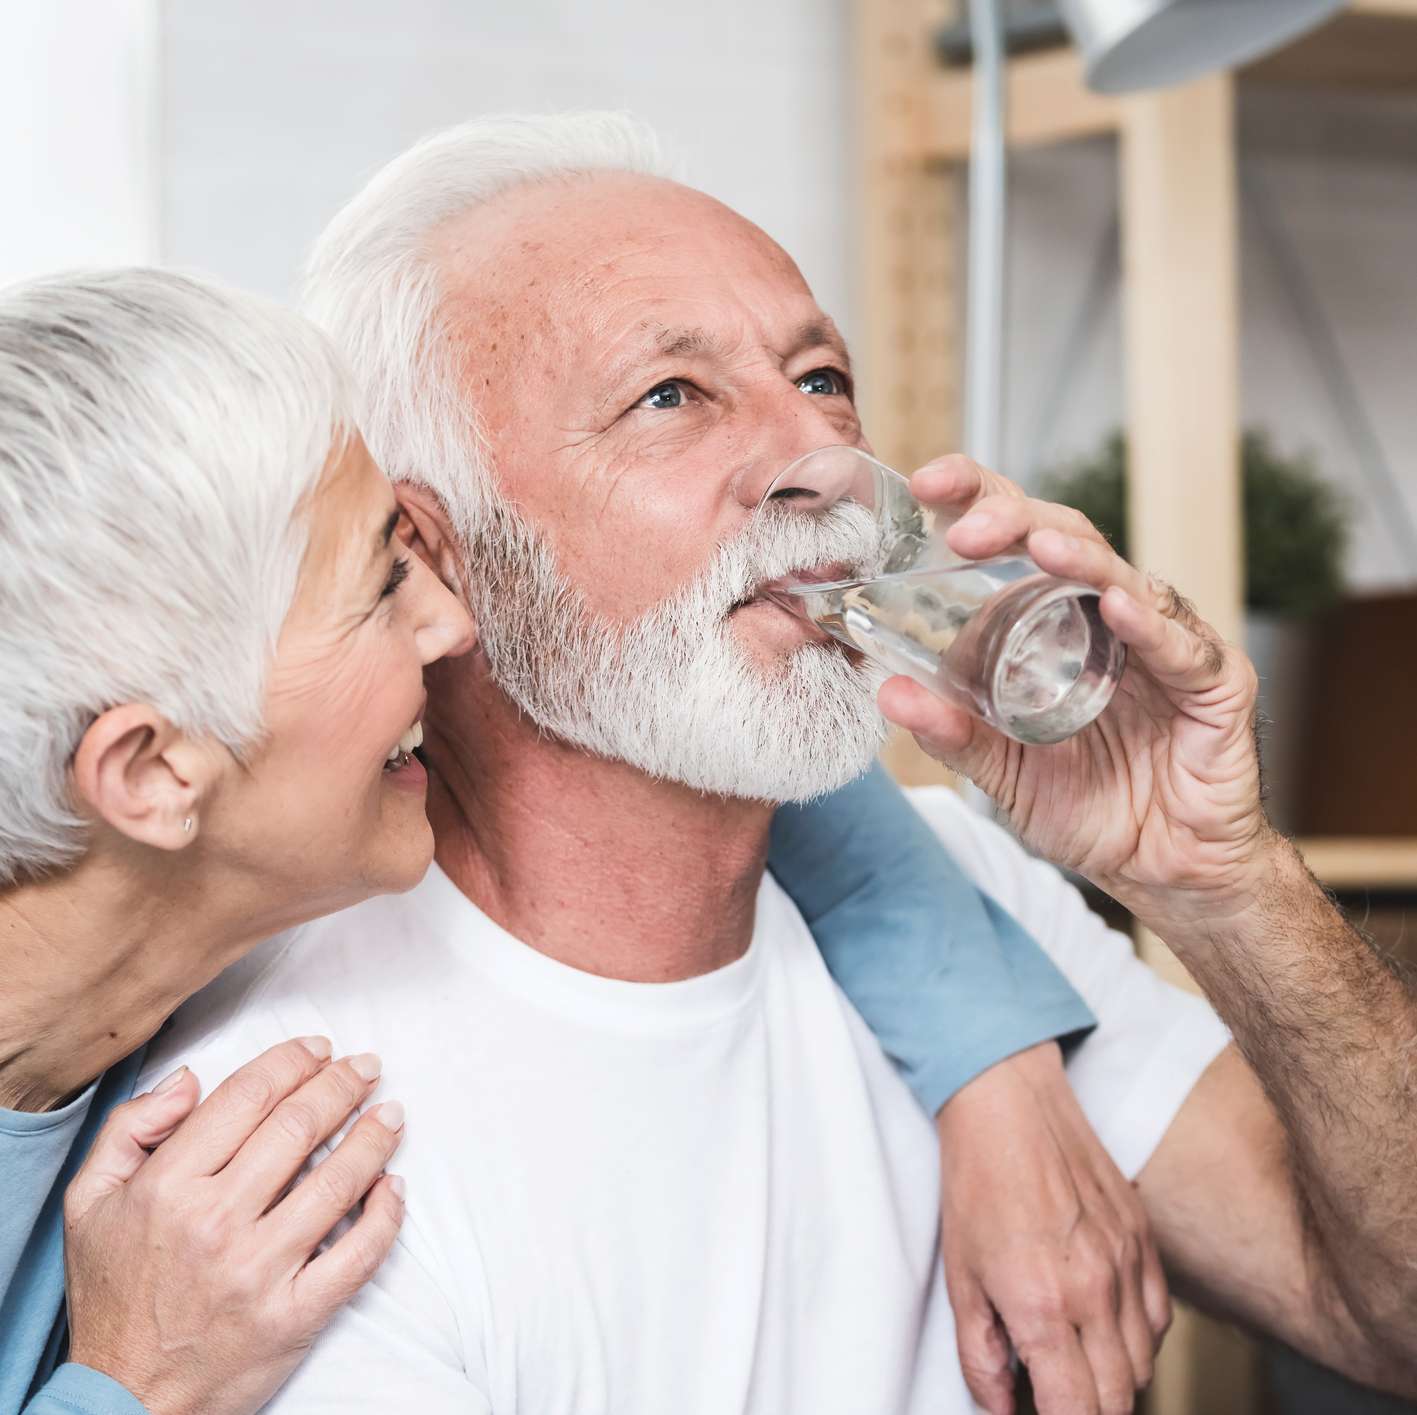 Older man drinking a glass of water with smiling wife's left arm wrapped around him.